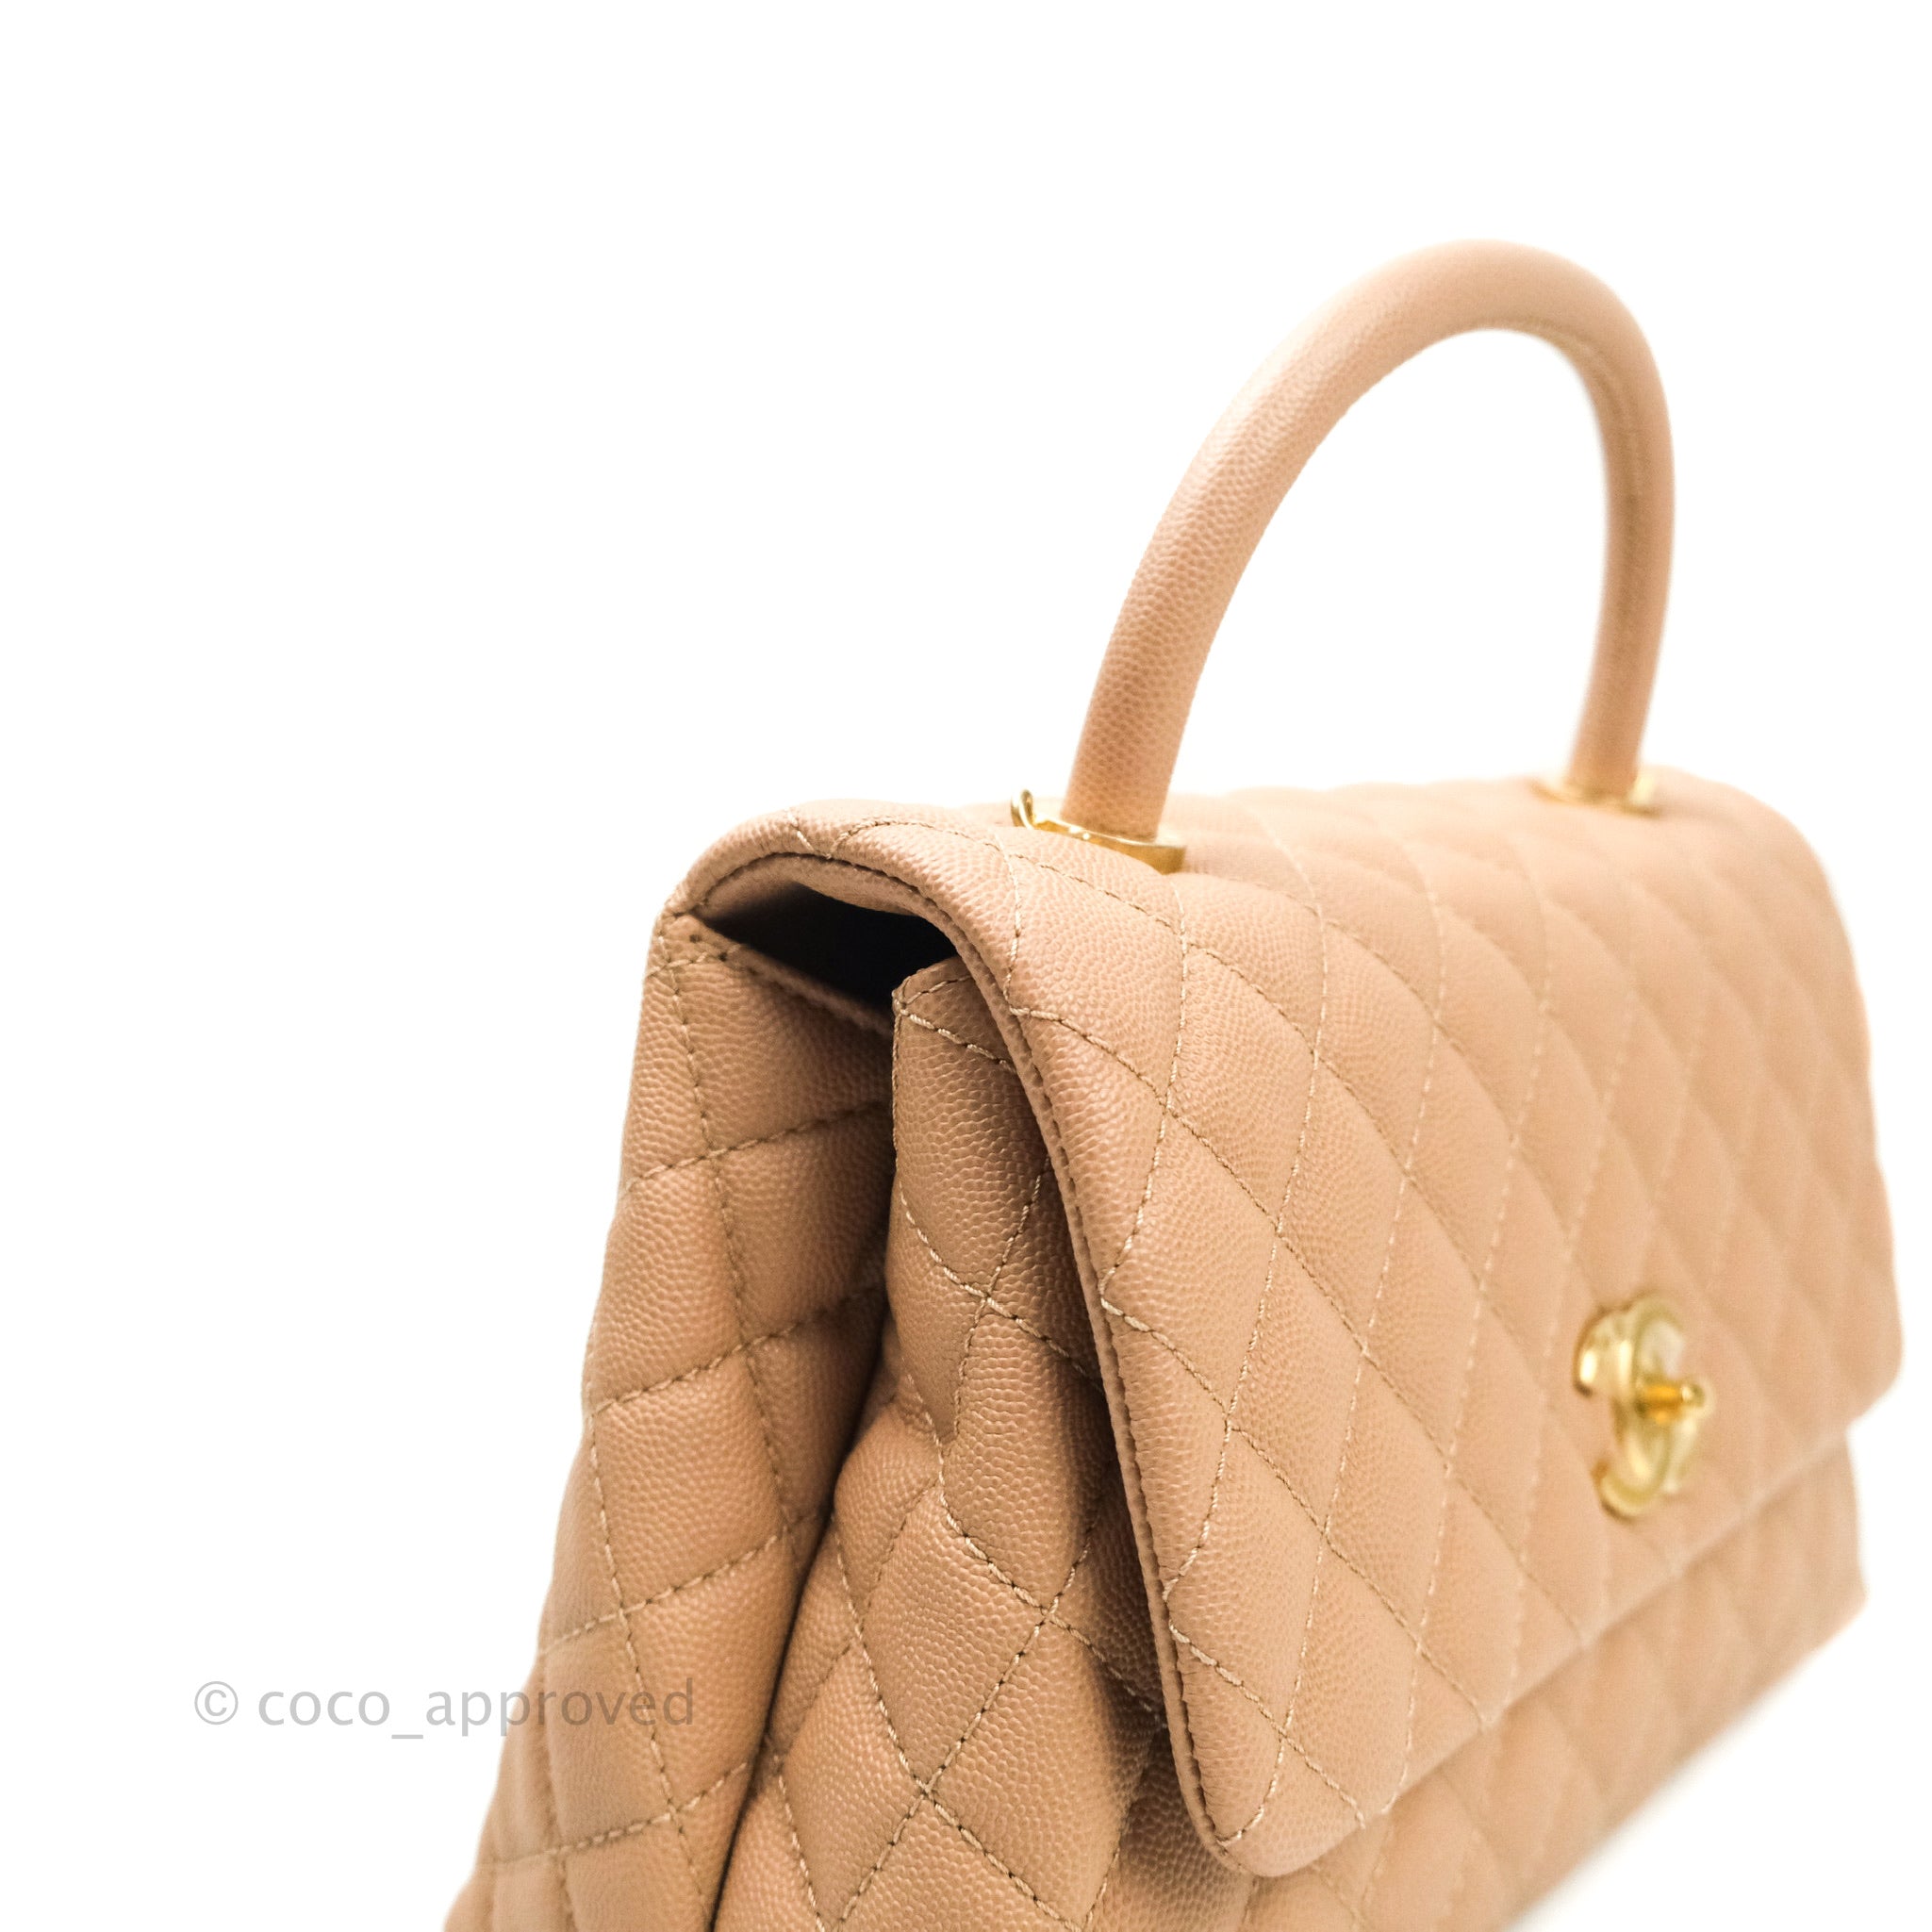 New 22K CHANEL Medium Large Classic Coco Handle Flap Beige Bag Gold HWR  CHIP